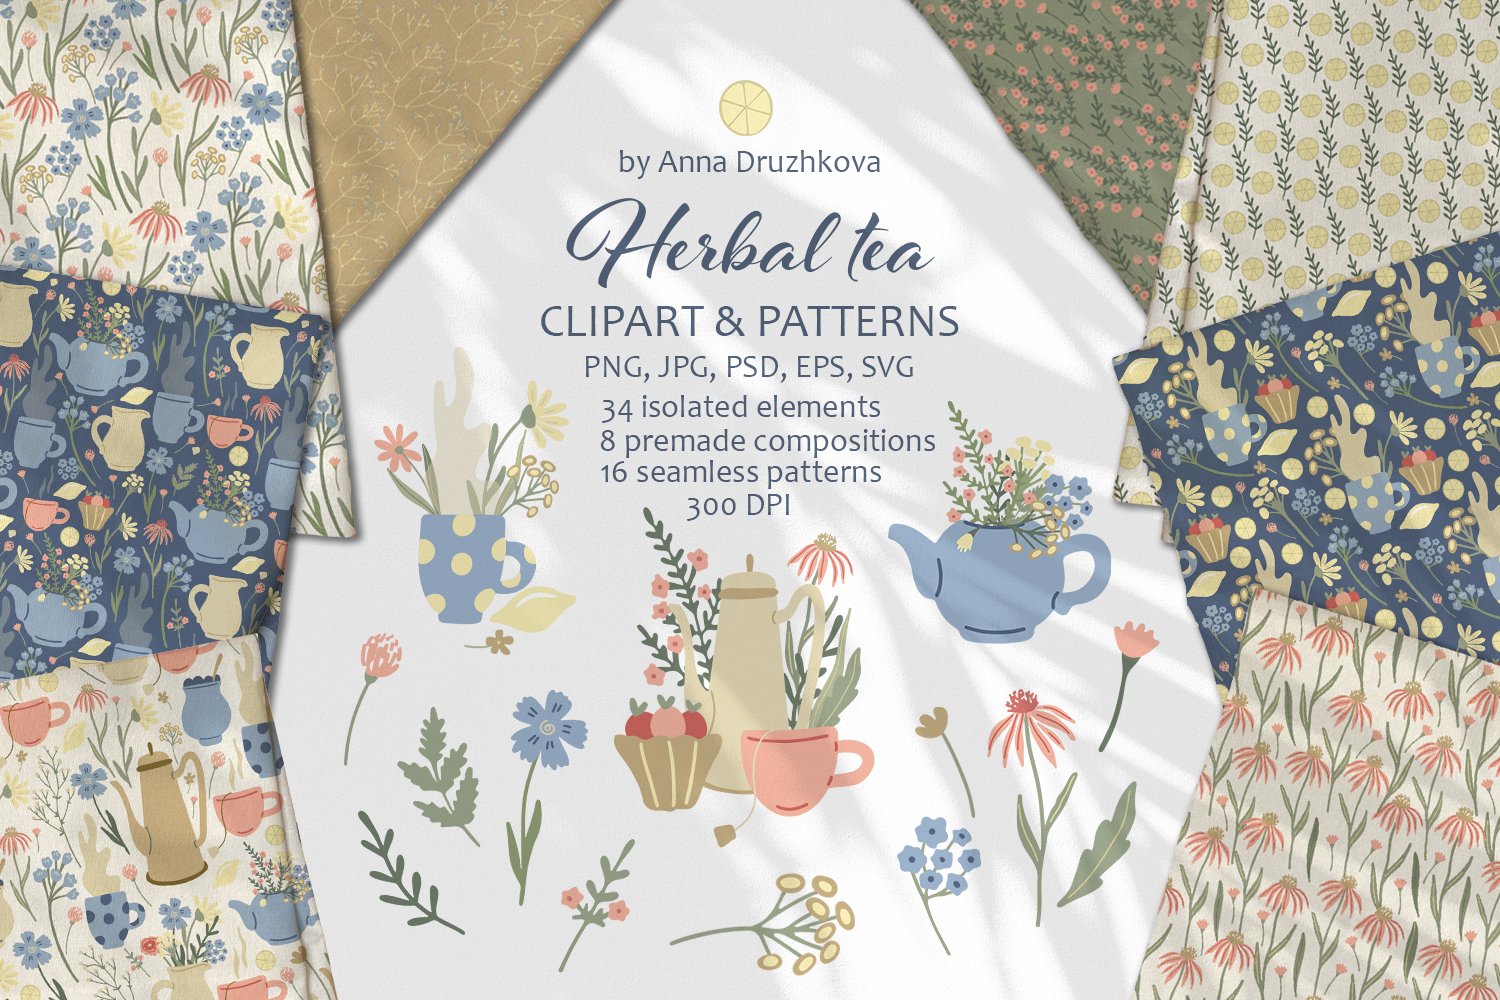 Herbal tea clipart and patterns cover image.